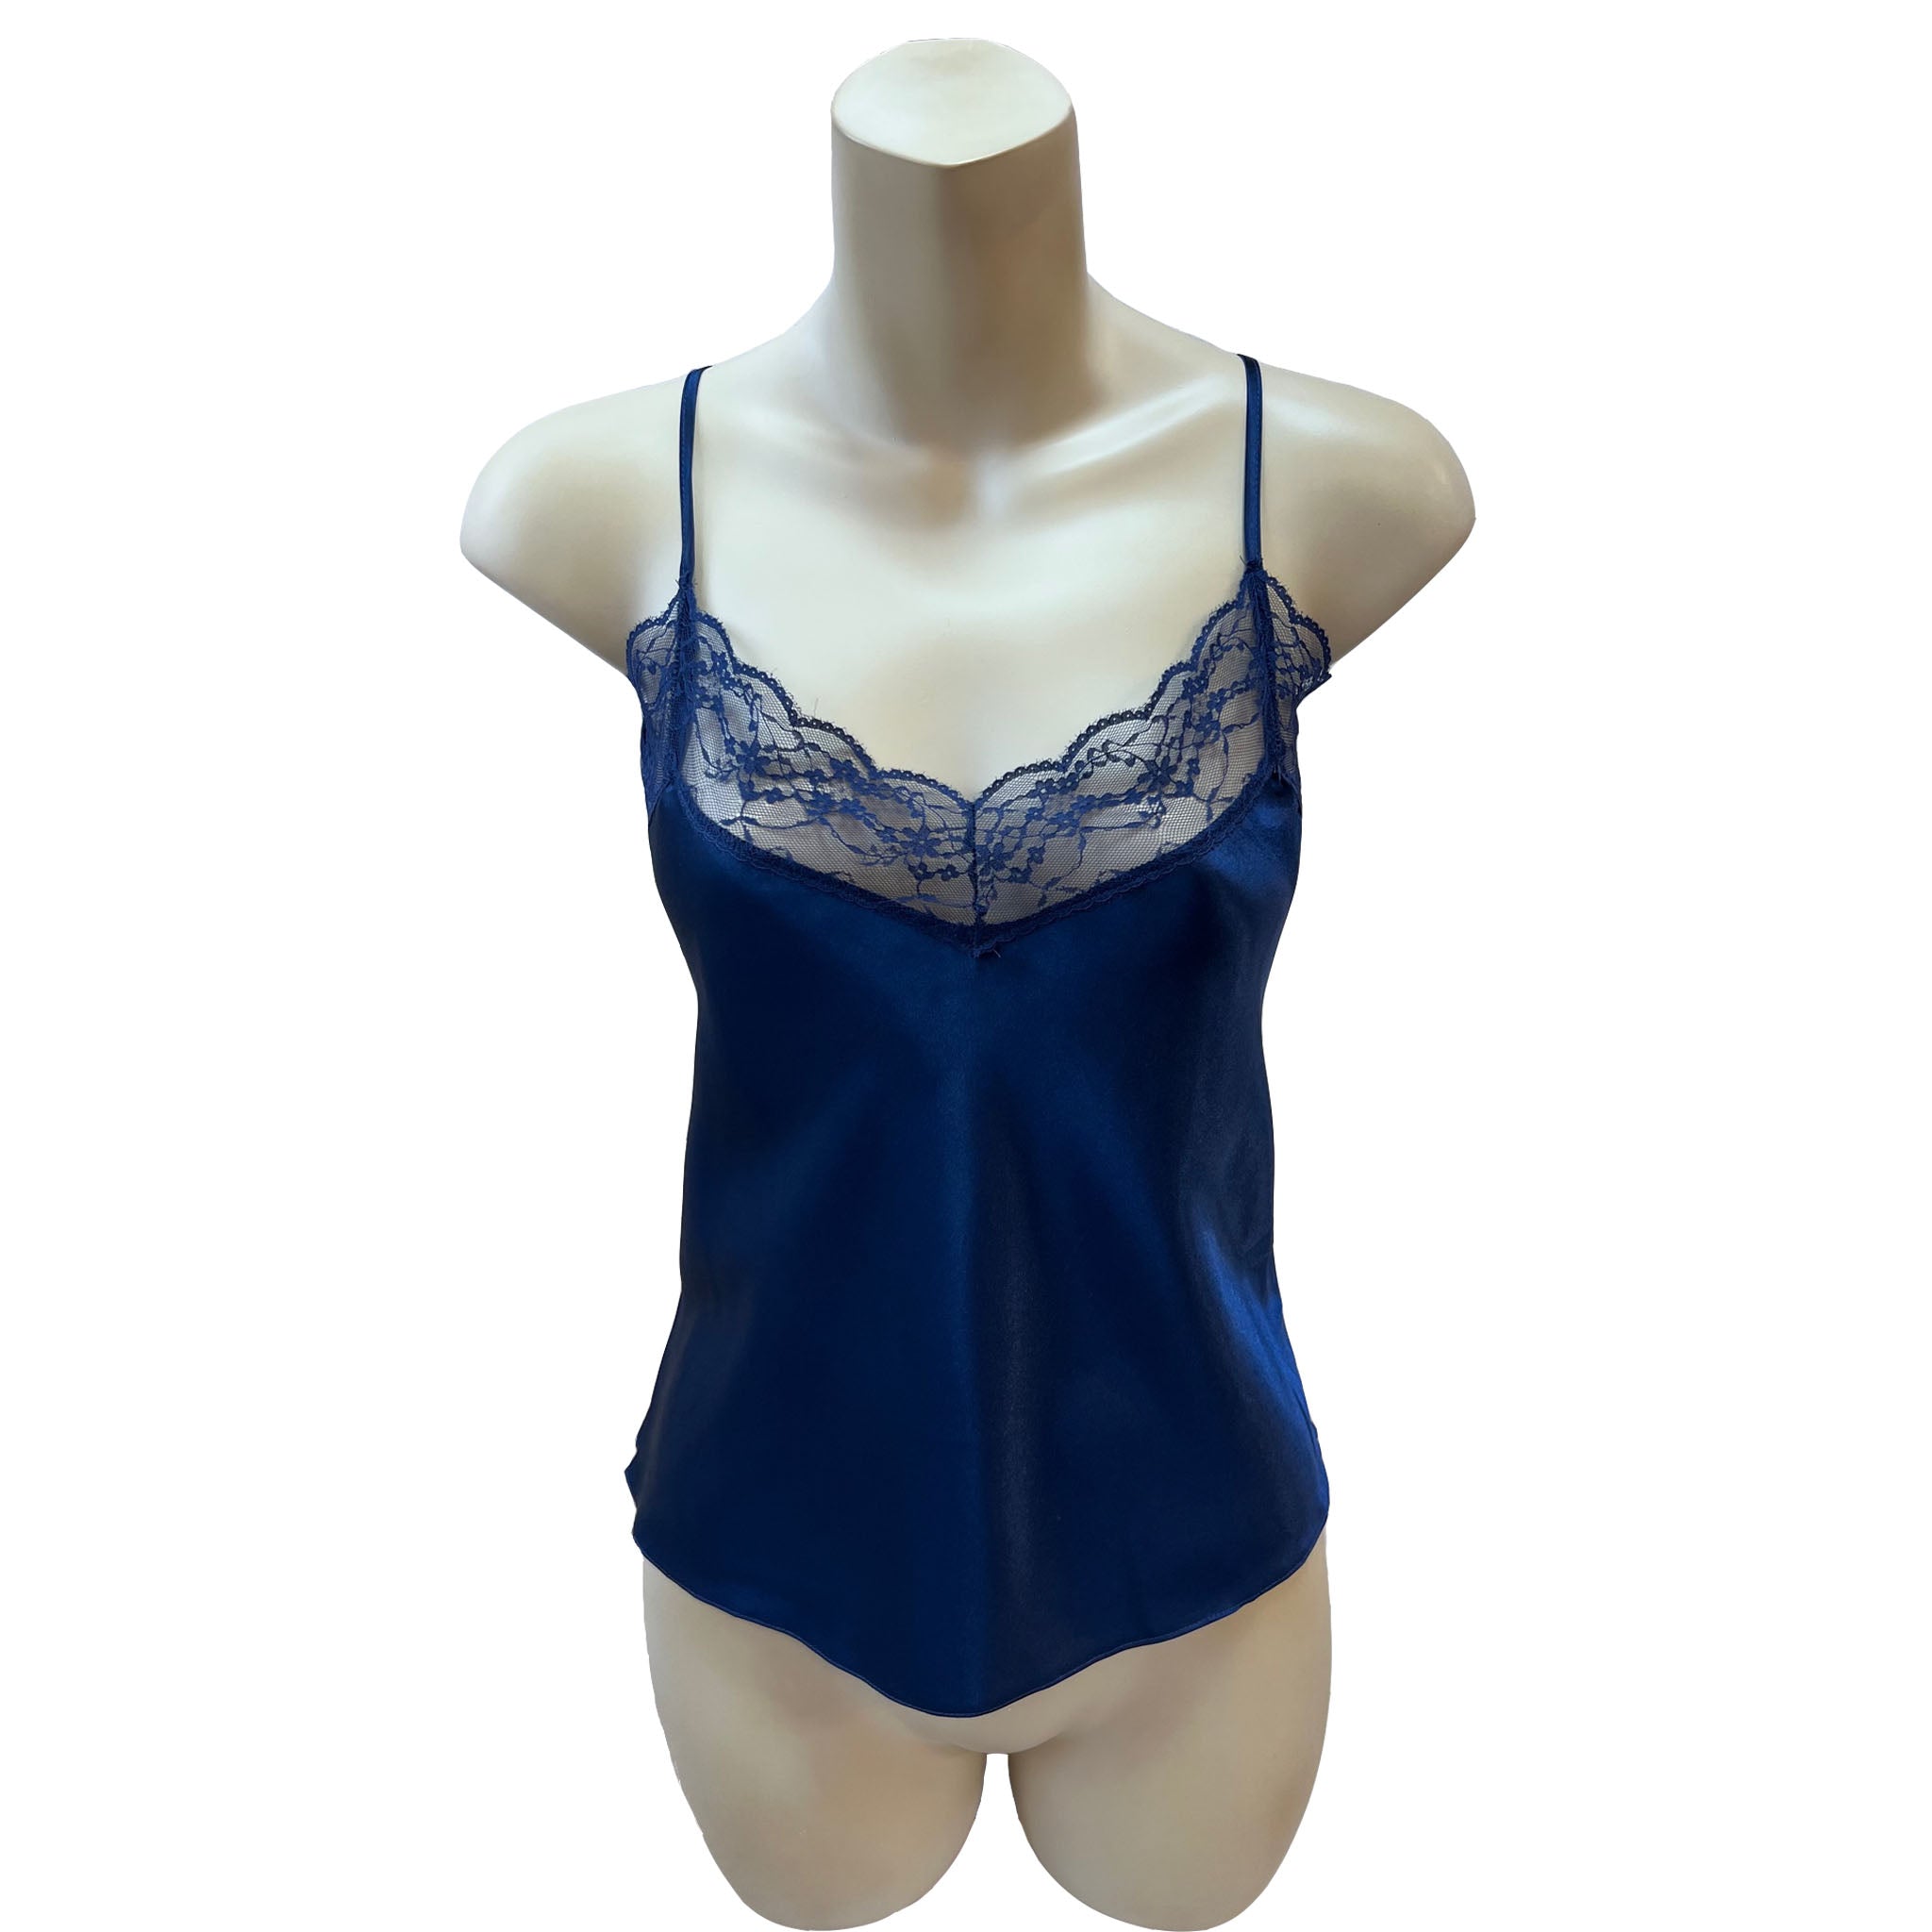 https://justforyouboutique.co.uk/cdn/shop/files/ladies-plain-navy-satin-lace-cami-camisole-top-uk-size-just-for-you-boutique.jpg?v=1691943976